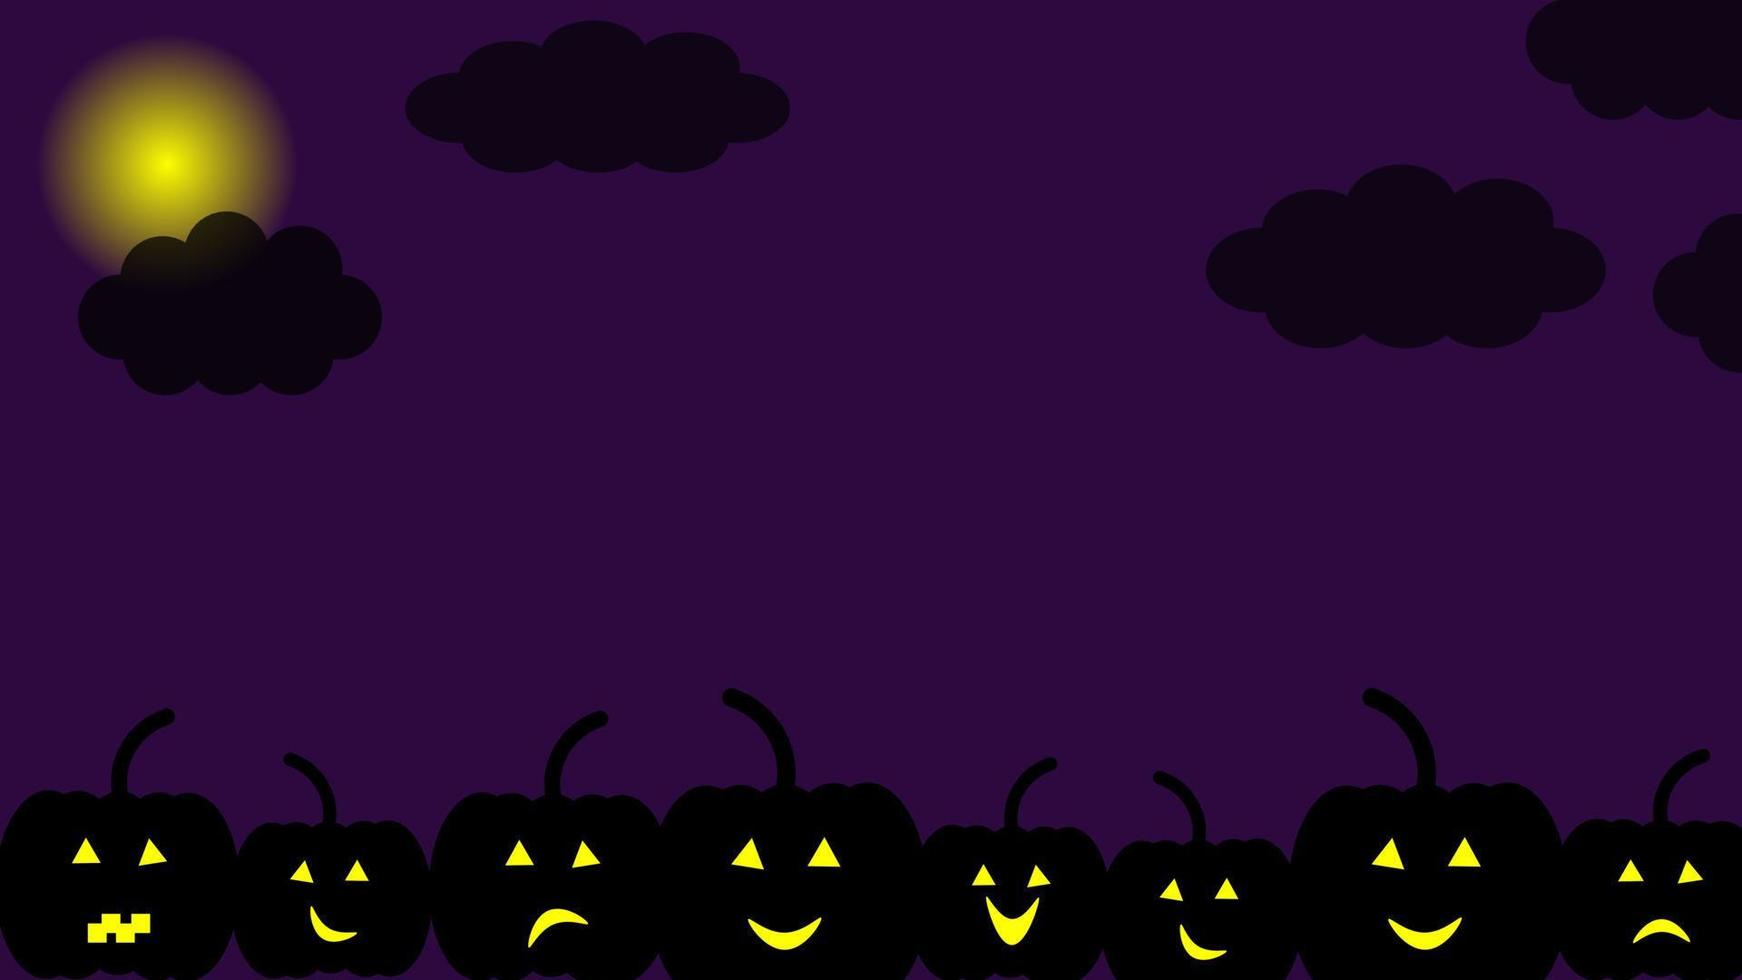 Happy Halloween spooky pumpkin on purple wallpaper illustration, perfect for wallpaper, backdrop, postcard, background for your design vector